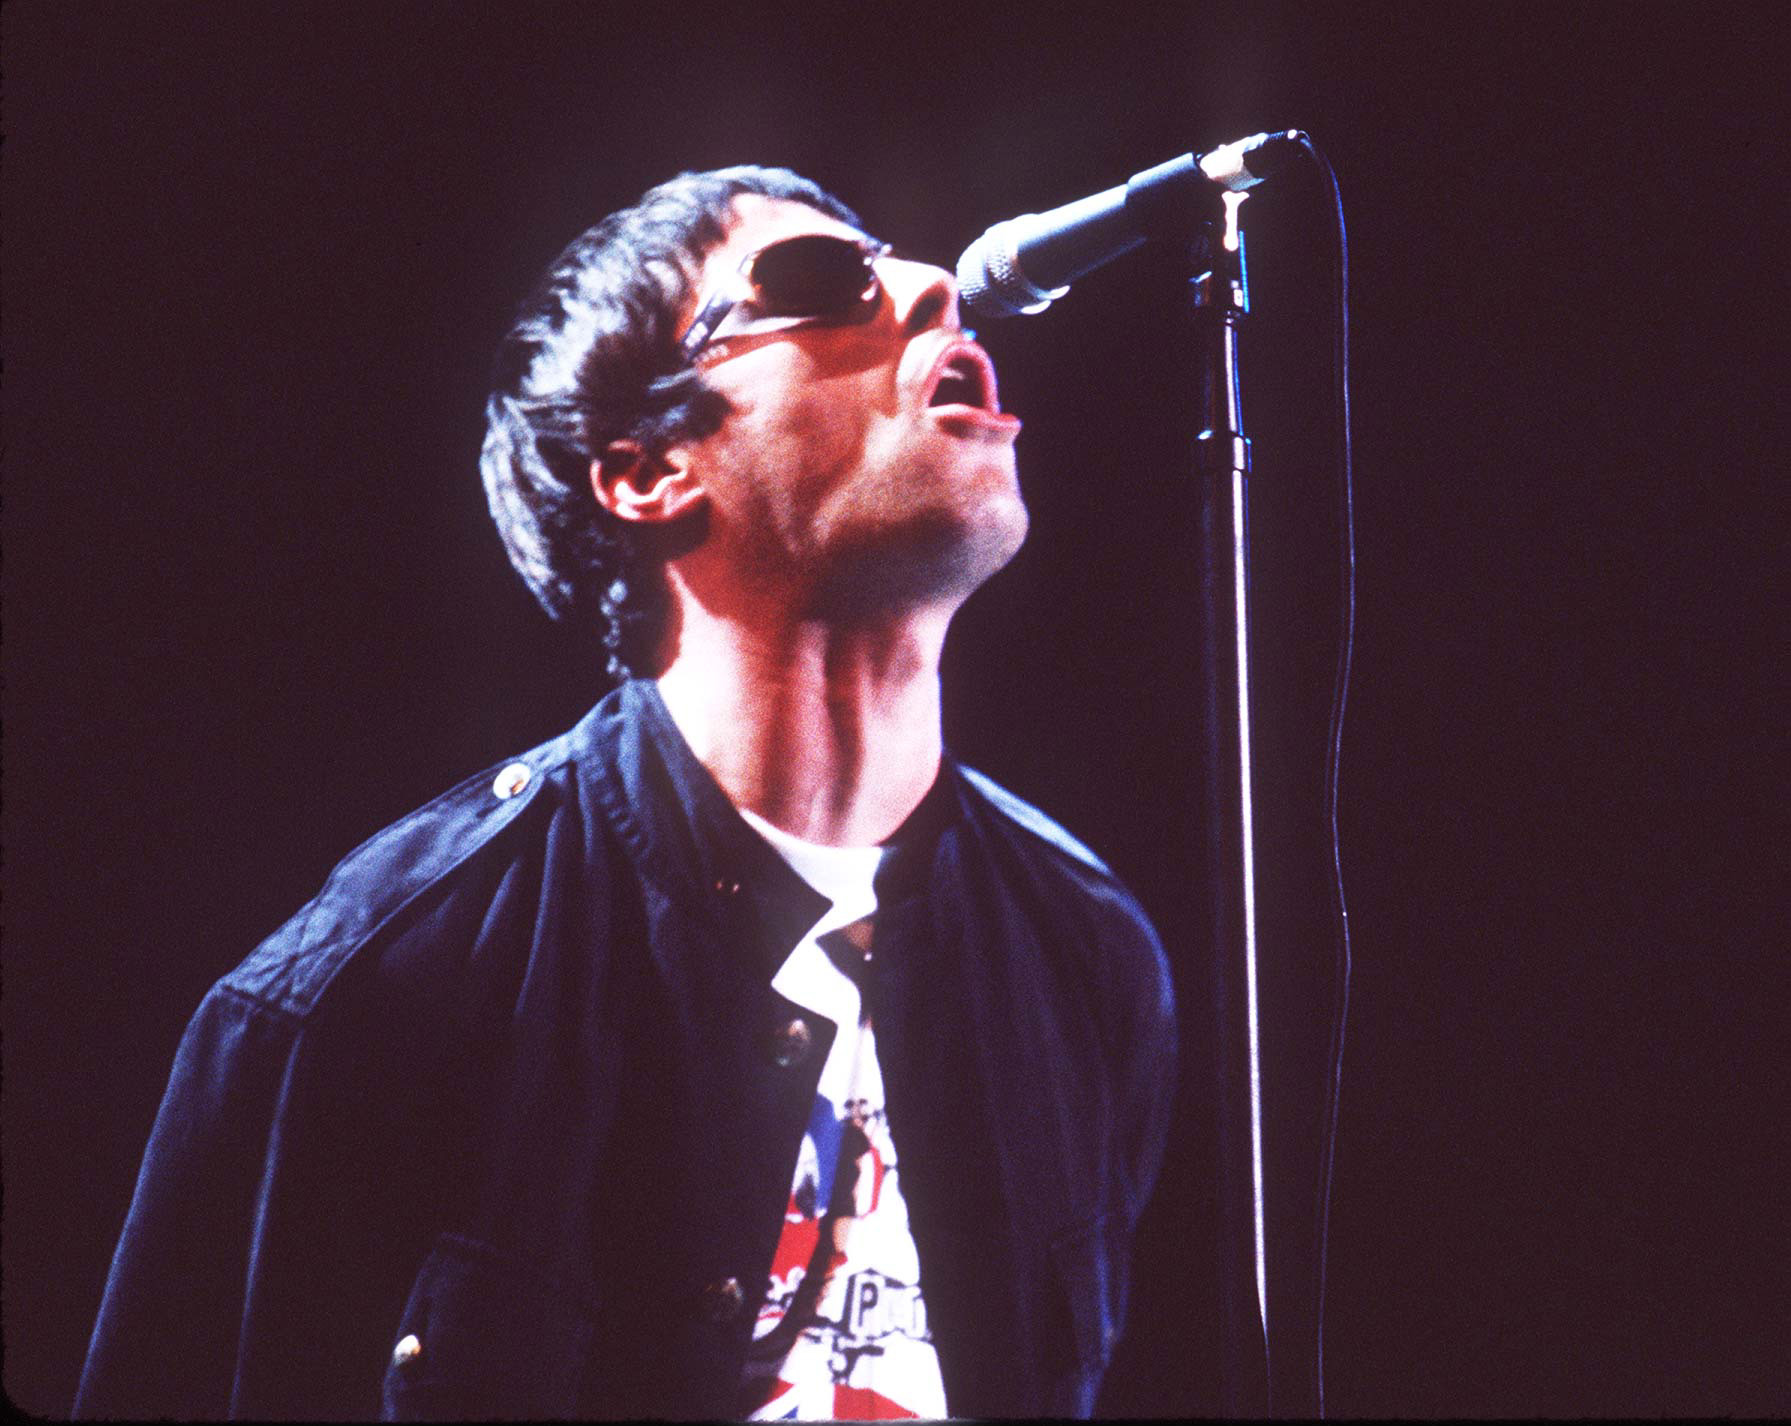 Liam Gallagher of Oasis with a microphone